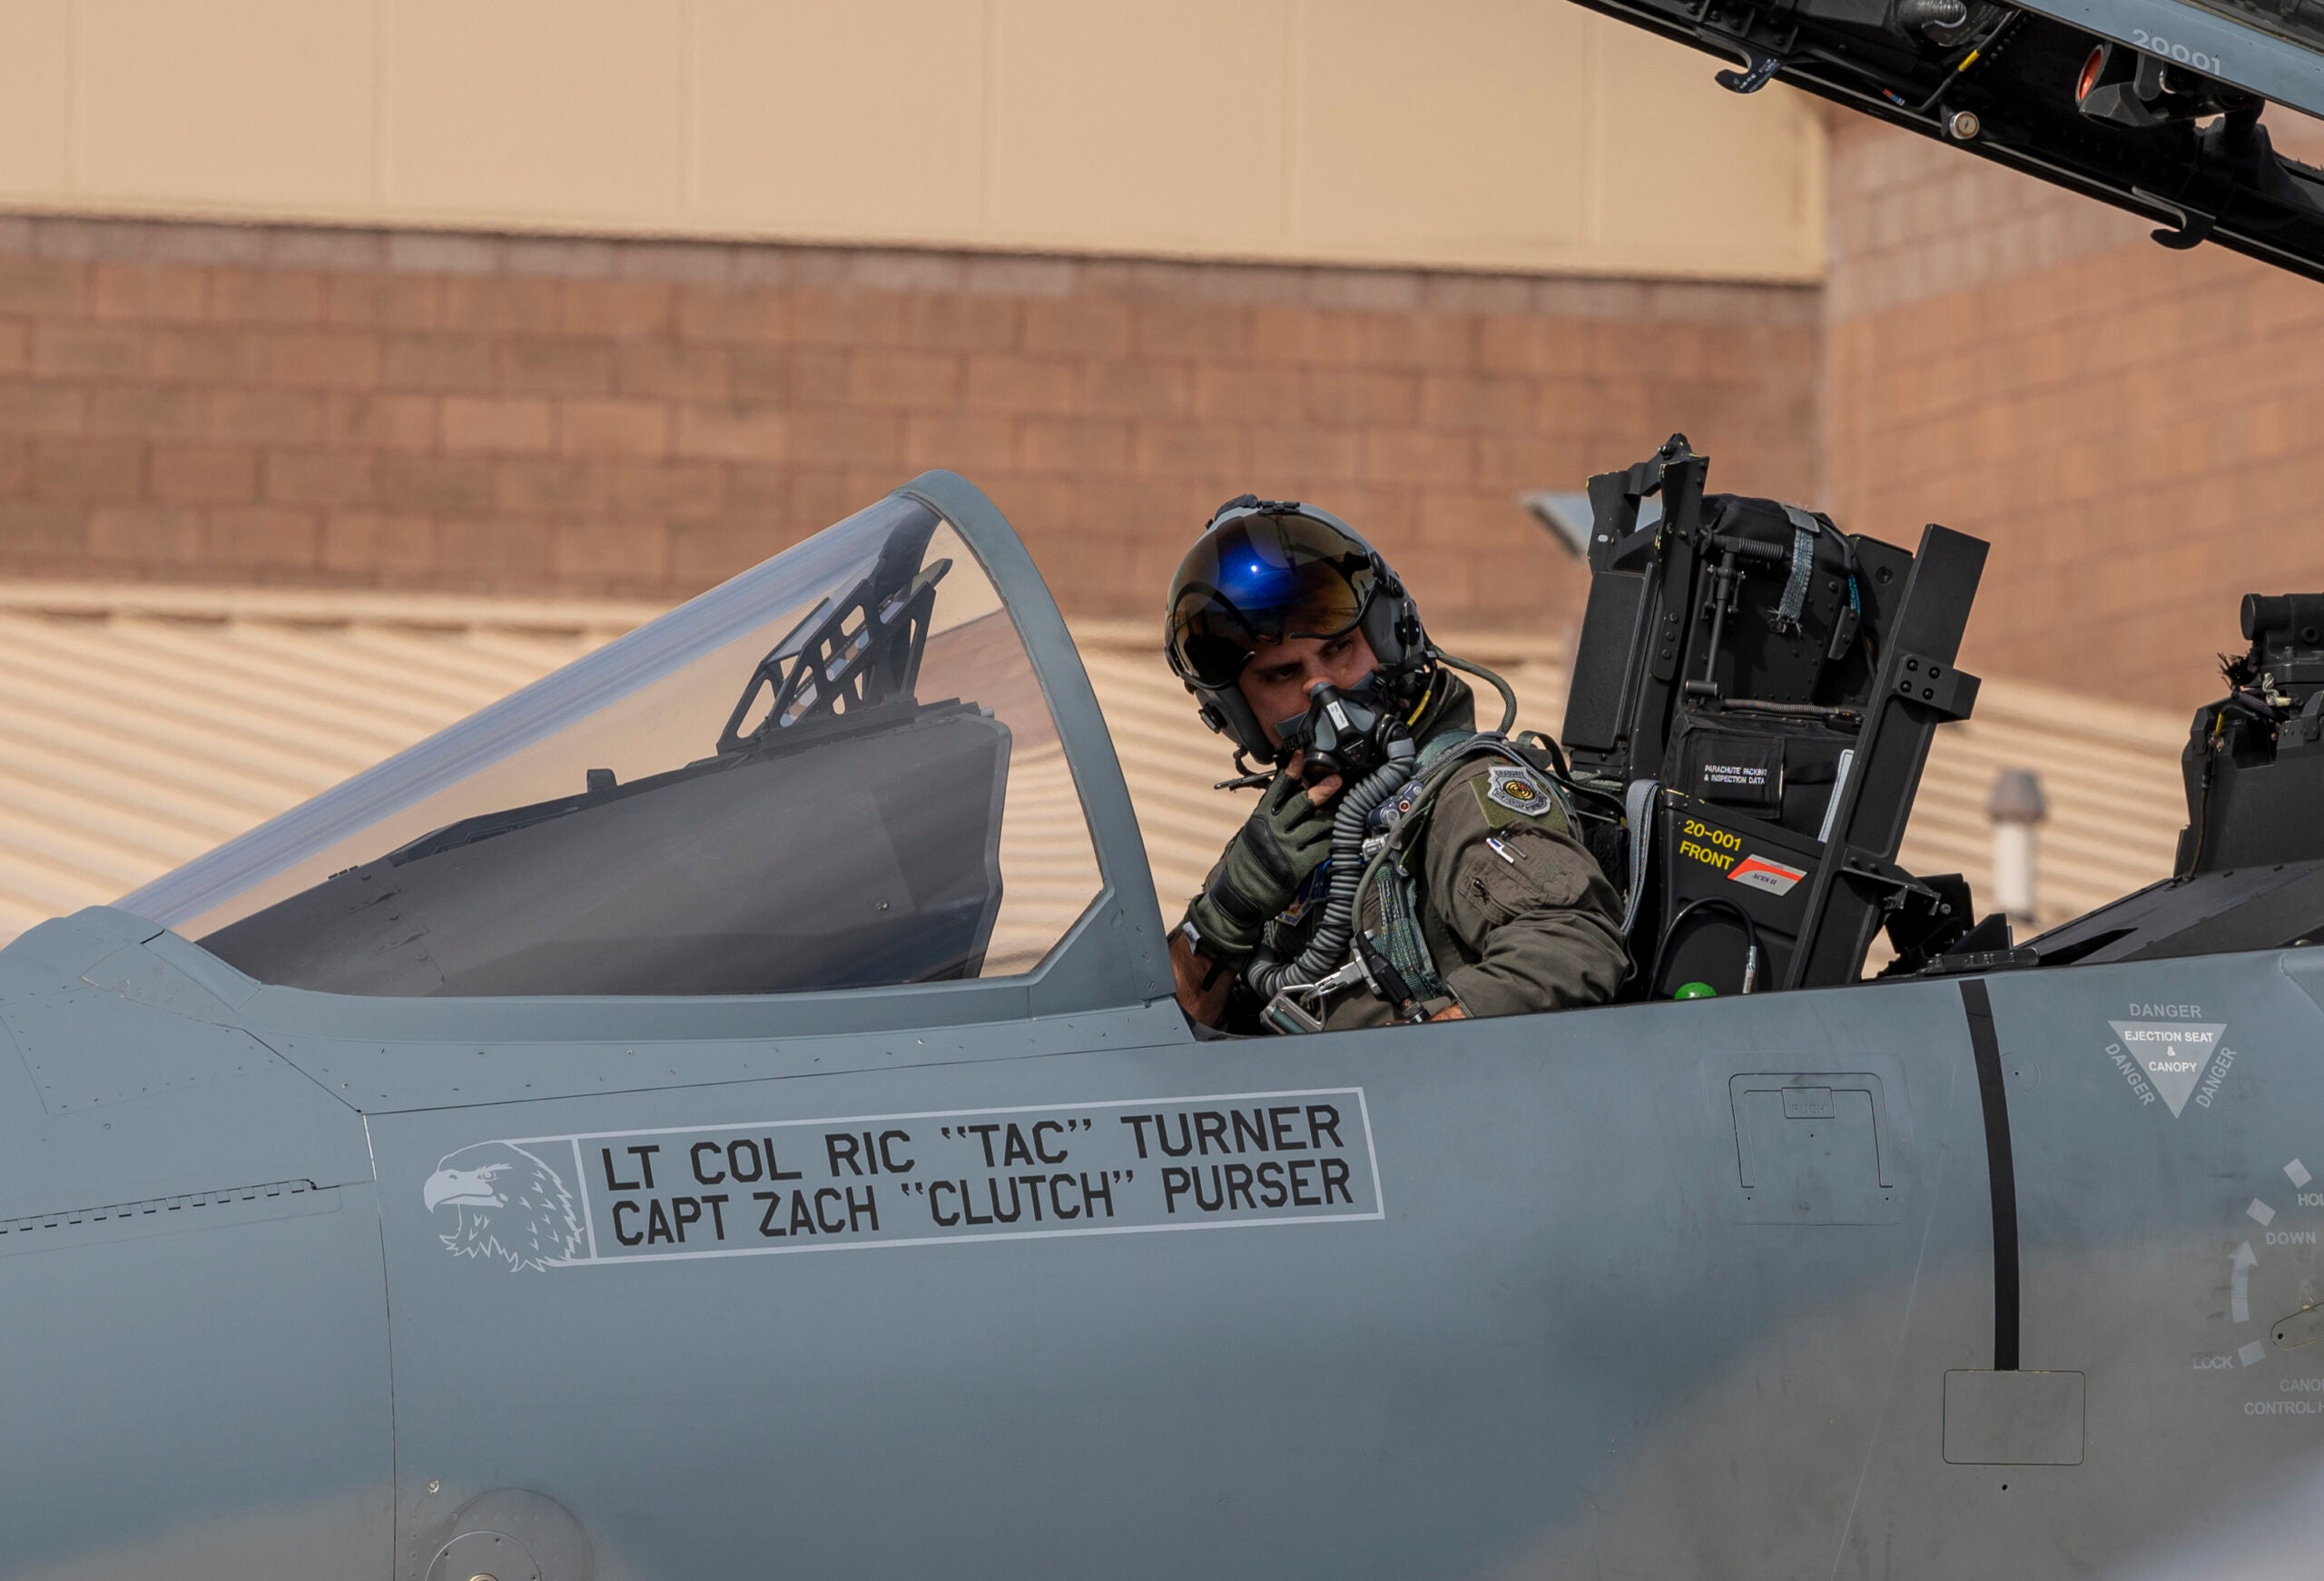 Maj. Kevin Hand, F-15EX operational and experimental test pilot with the Air National Guard-Air Force Reserve Test Center, prepares to taxi out for a mission from Nellis Air Force Base, Nevada, Oct. 20, 2021. Hand will be flying the F-15EX Eagle II for test and evaluation flights for the Air Force’s newest fighter jet. (U.S. Air Force photo by William R. Lewis)